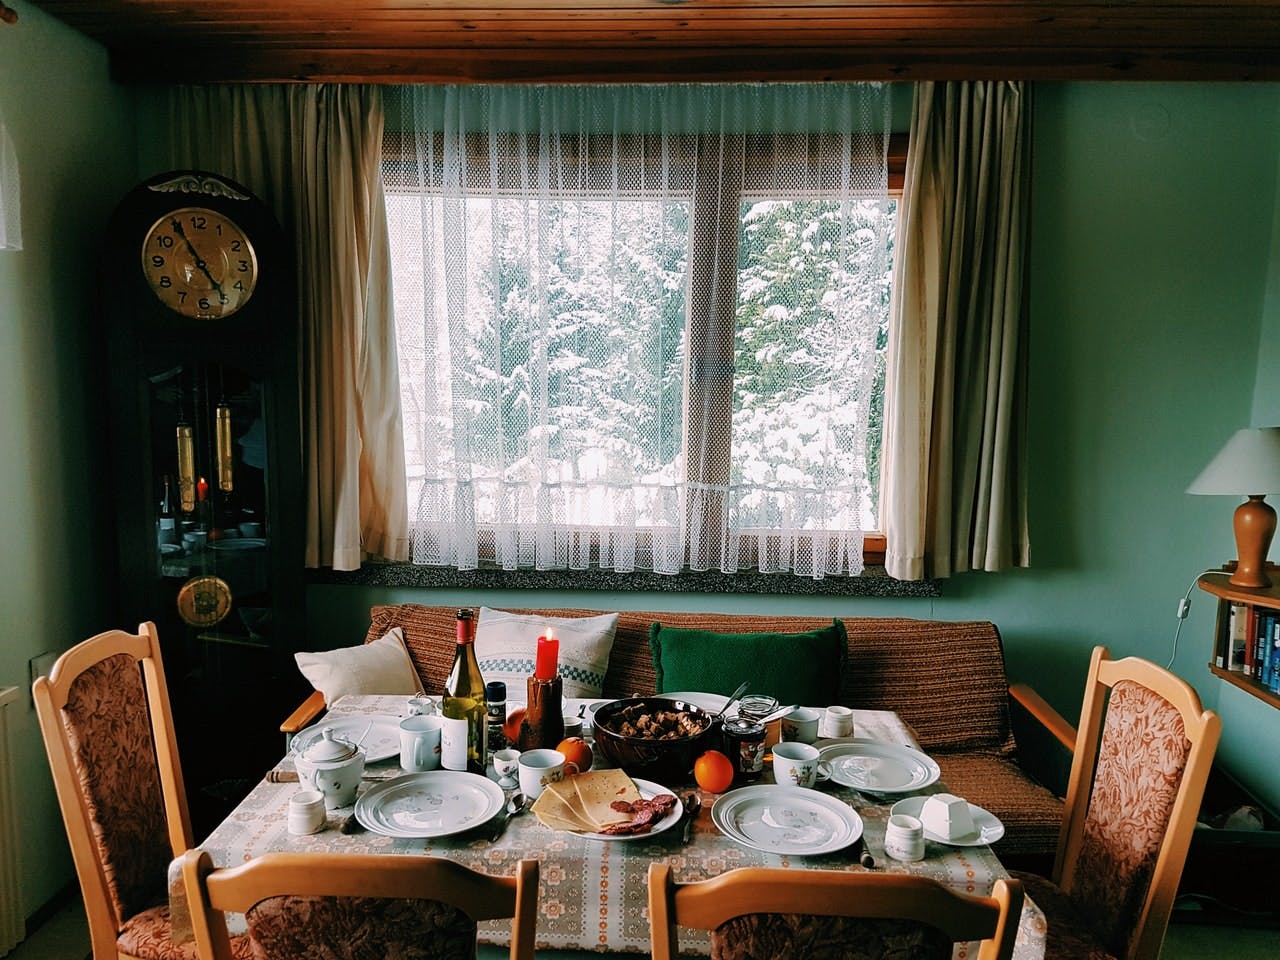 A table set for a meal next to a window with snow covered trees outside